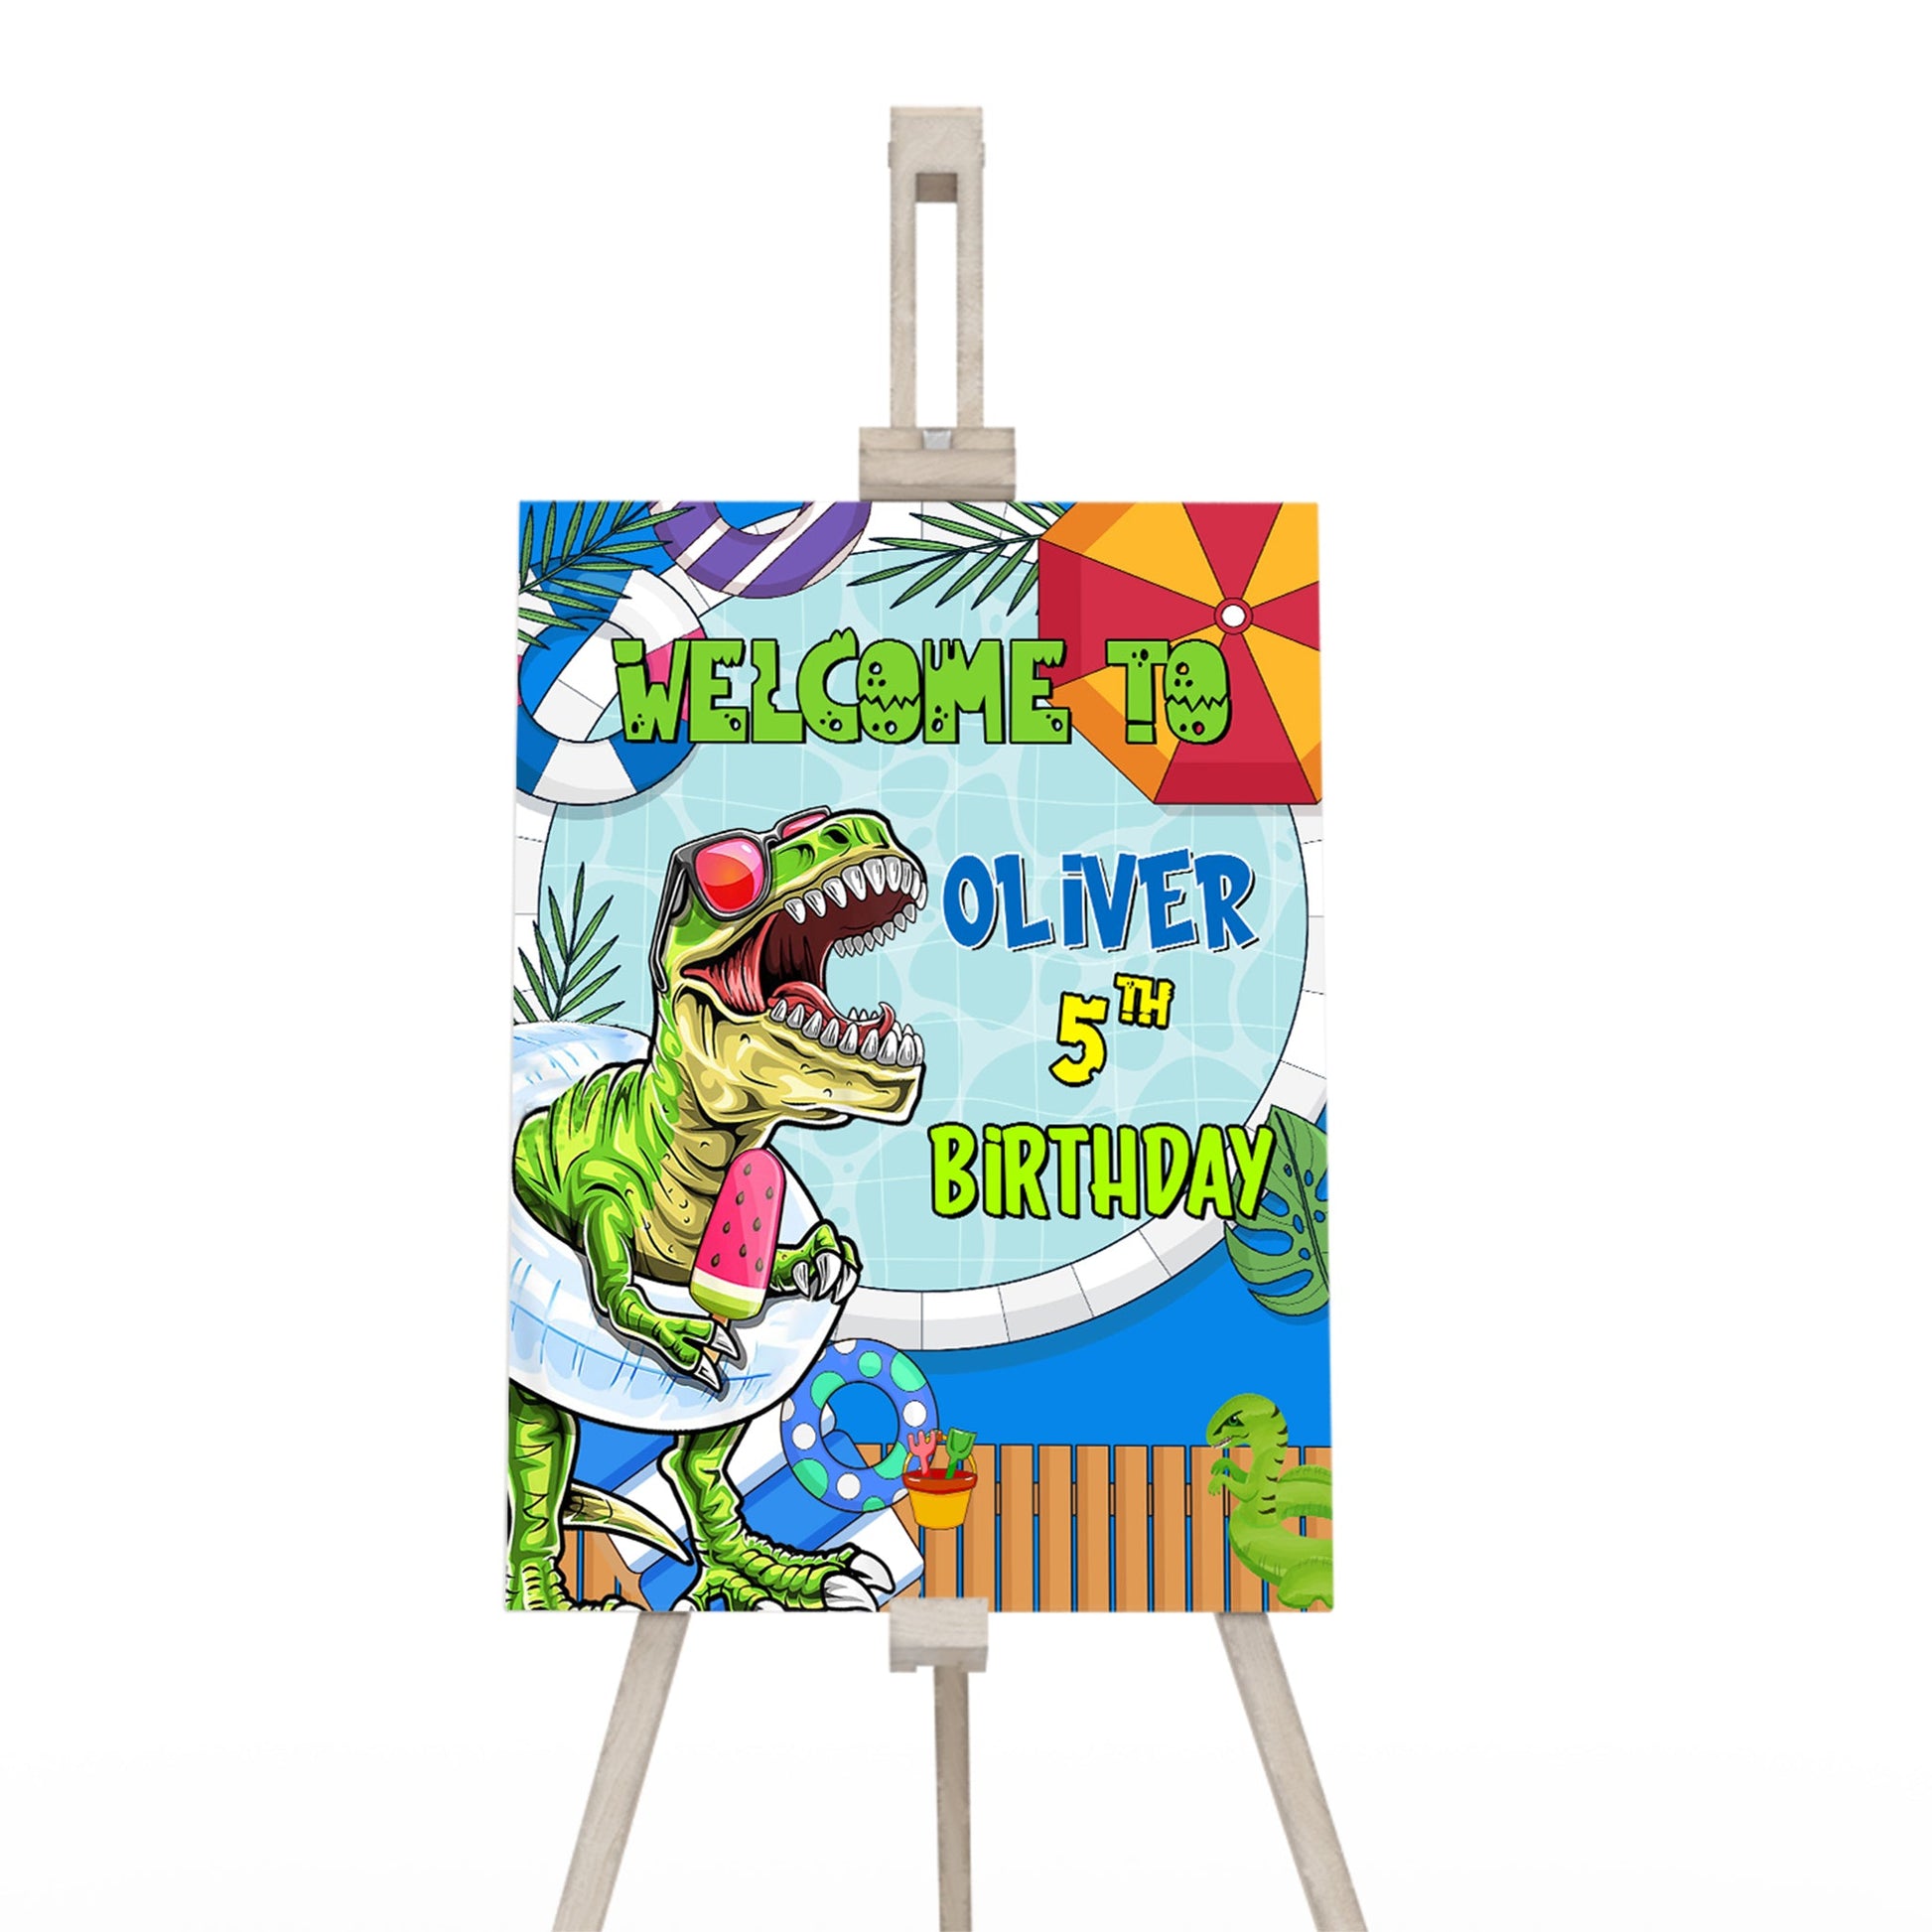 Welcome sign featuring dinosaur theme for parties